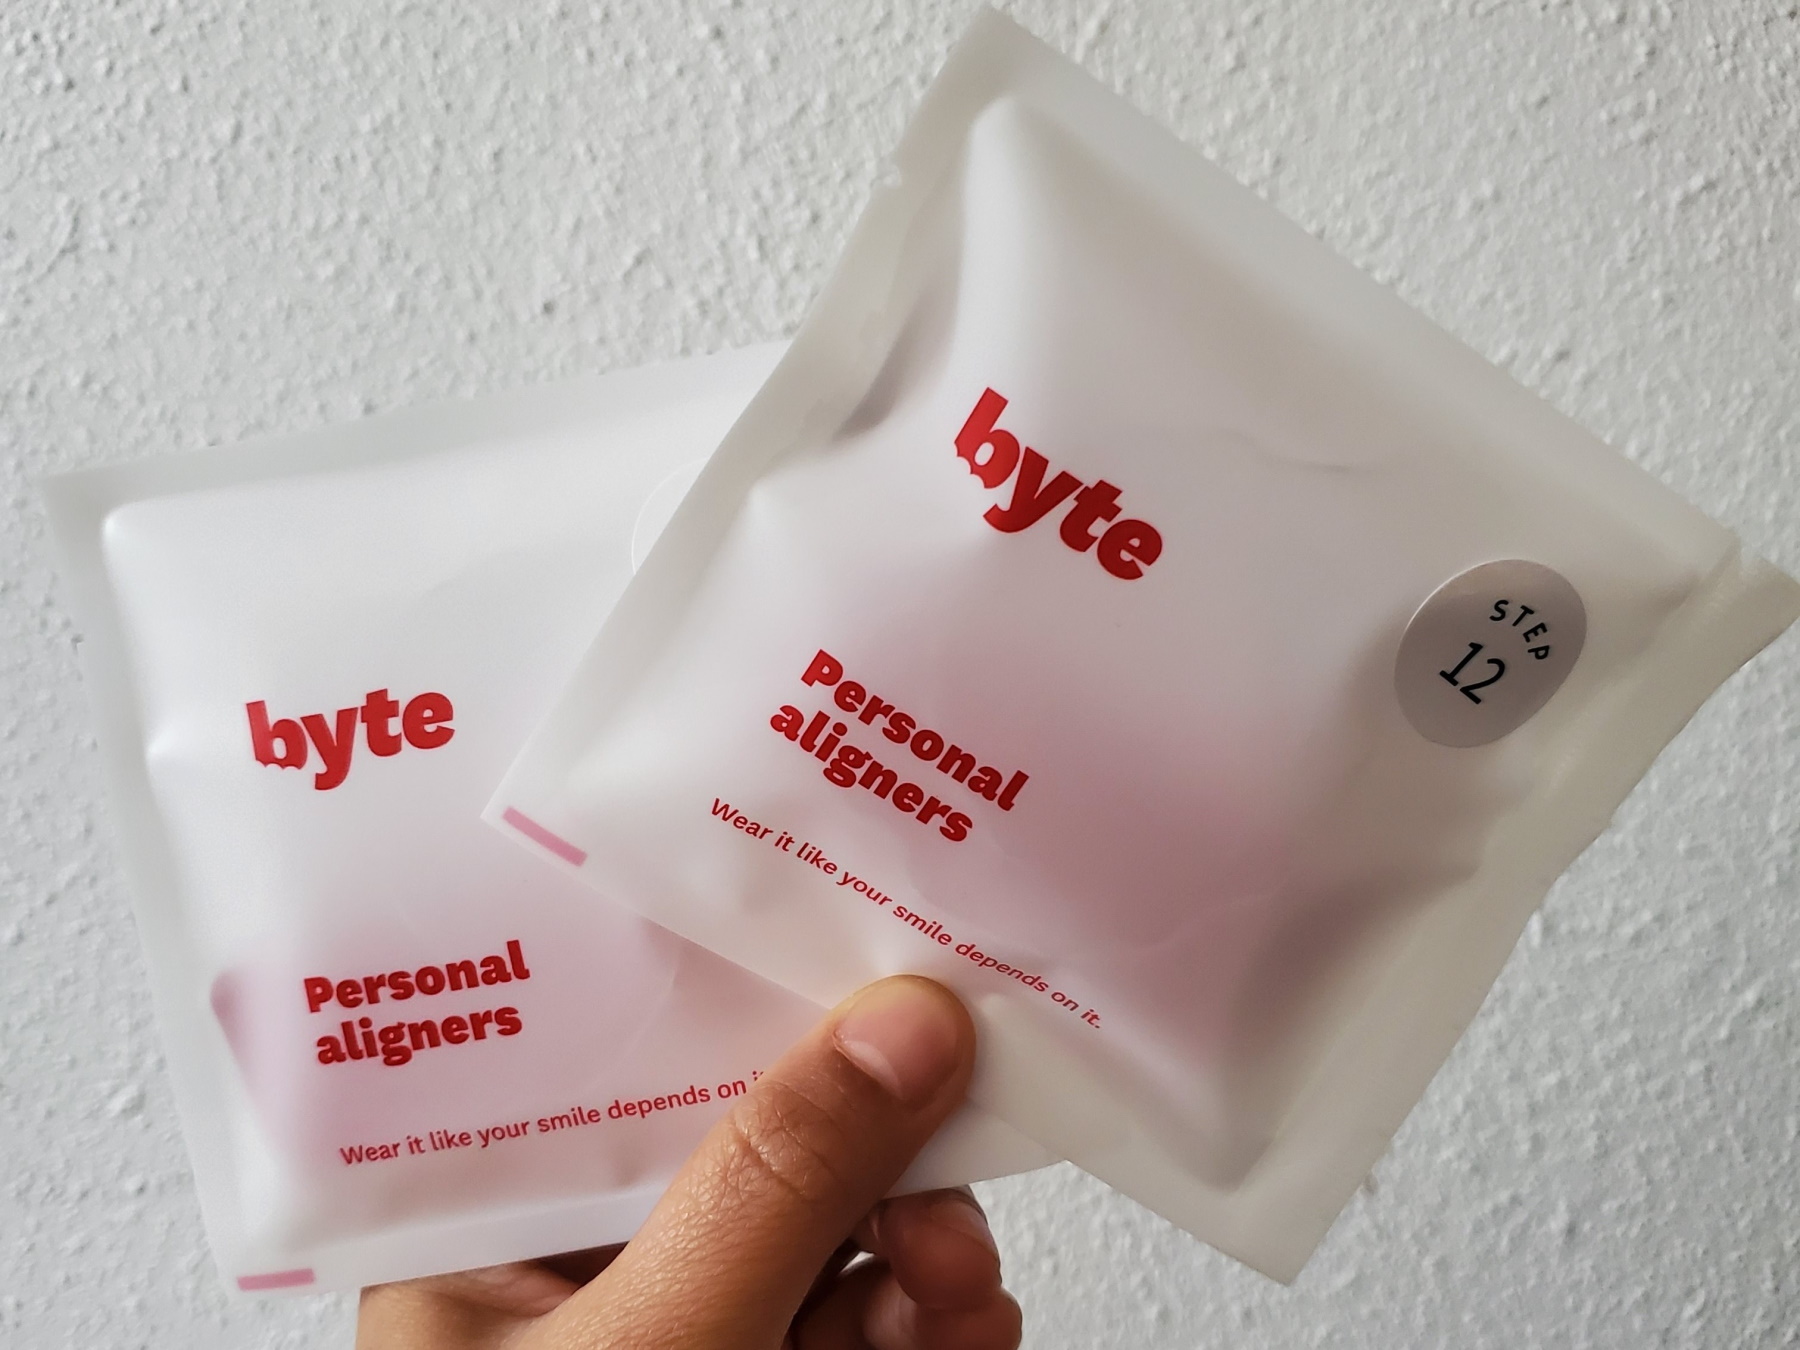 Invisalign vs. byte personal aligners that come in the mail